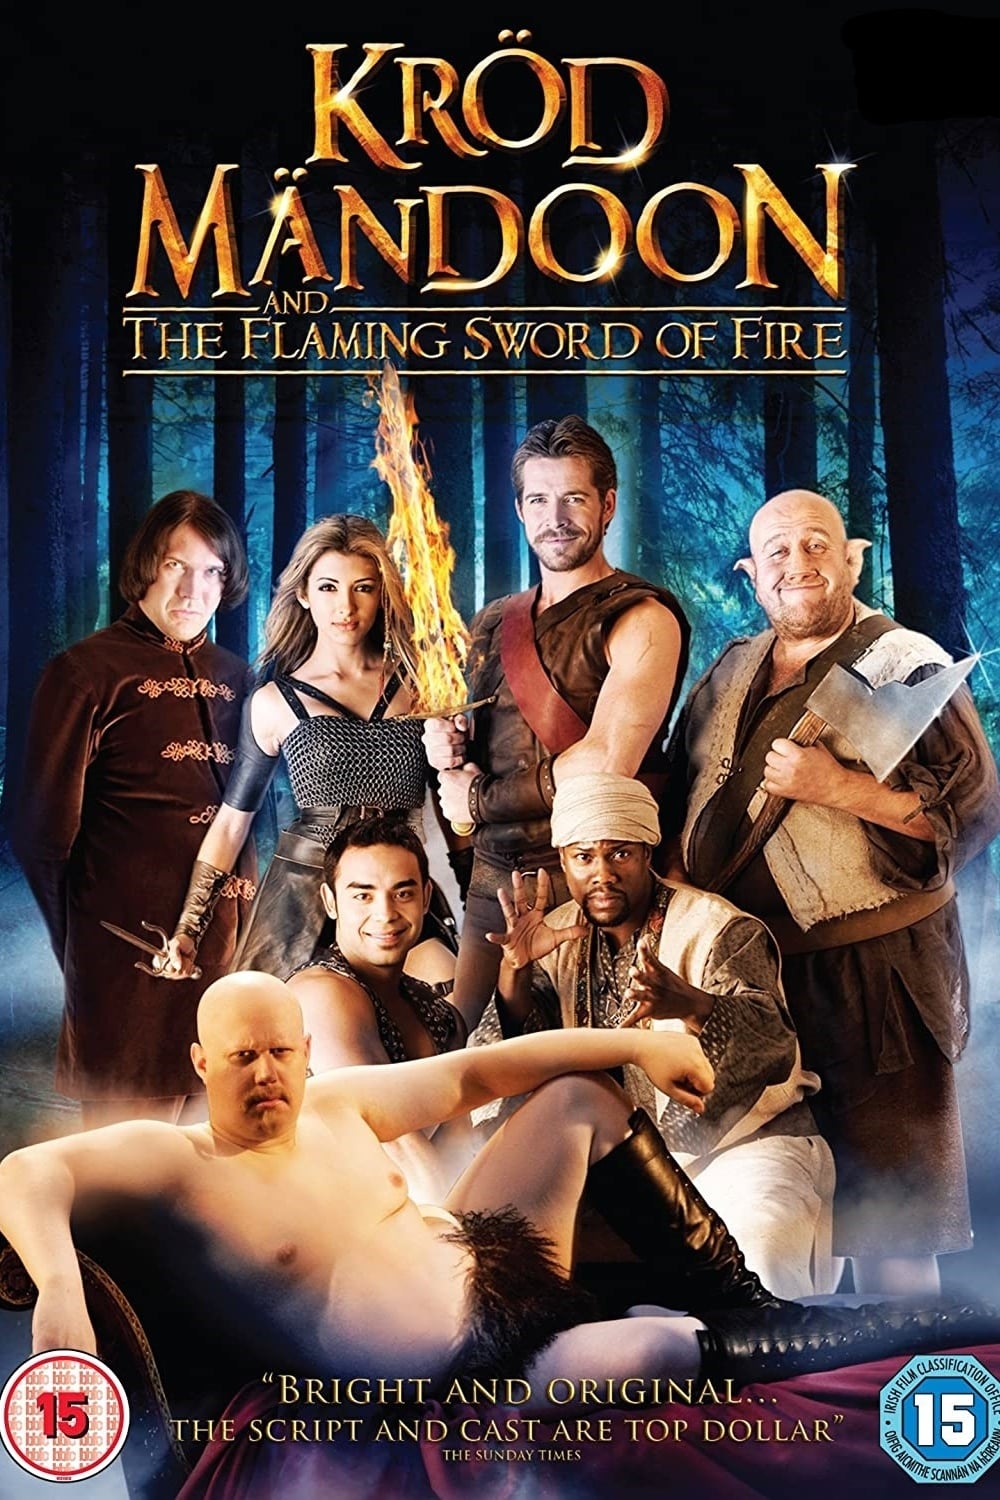 Krod Mandoon and the Flaming Sword of Fire (2009)